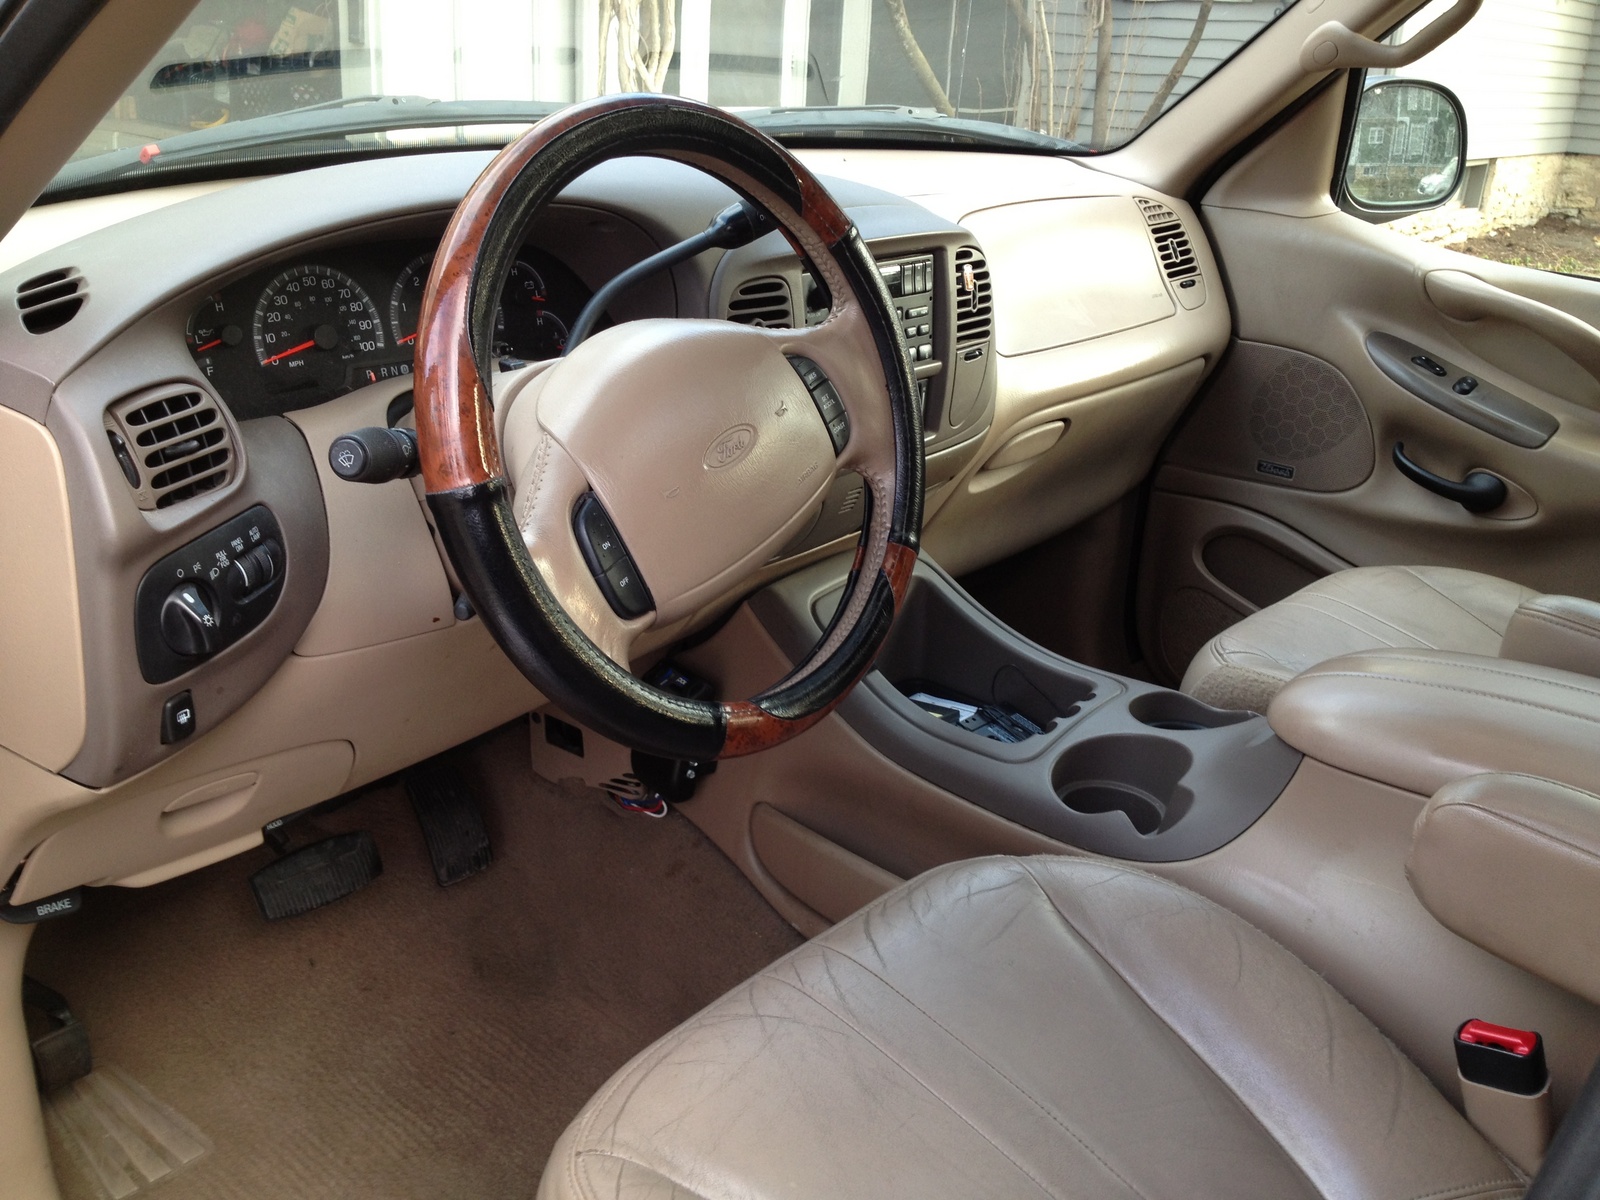 1999 Ford expedition interior #7